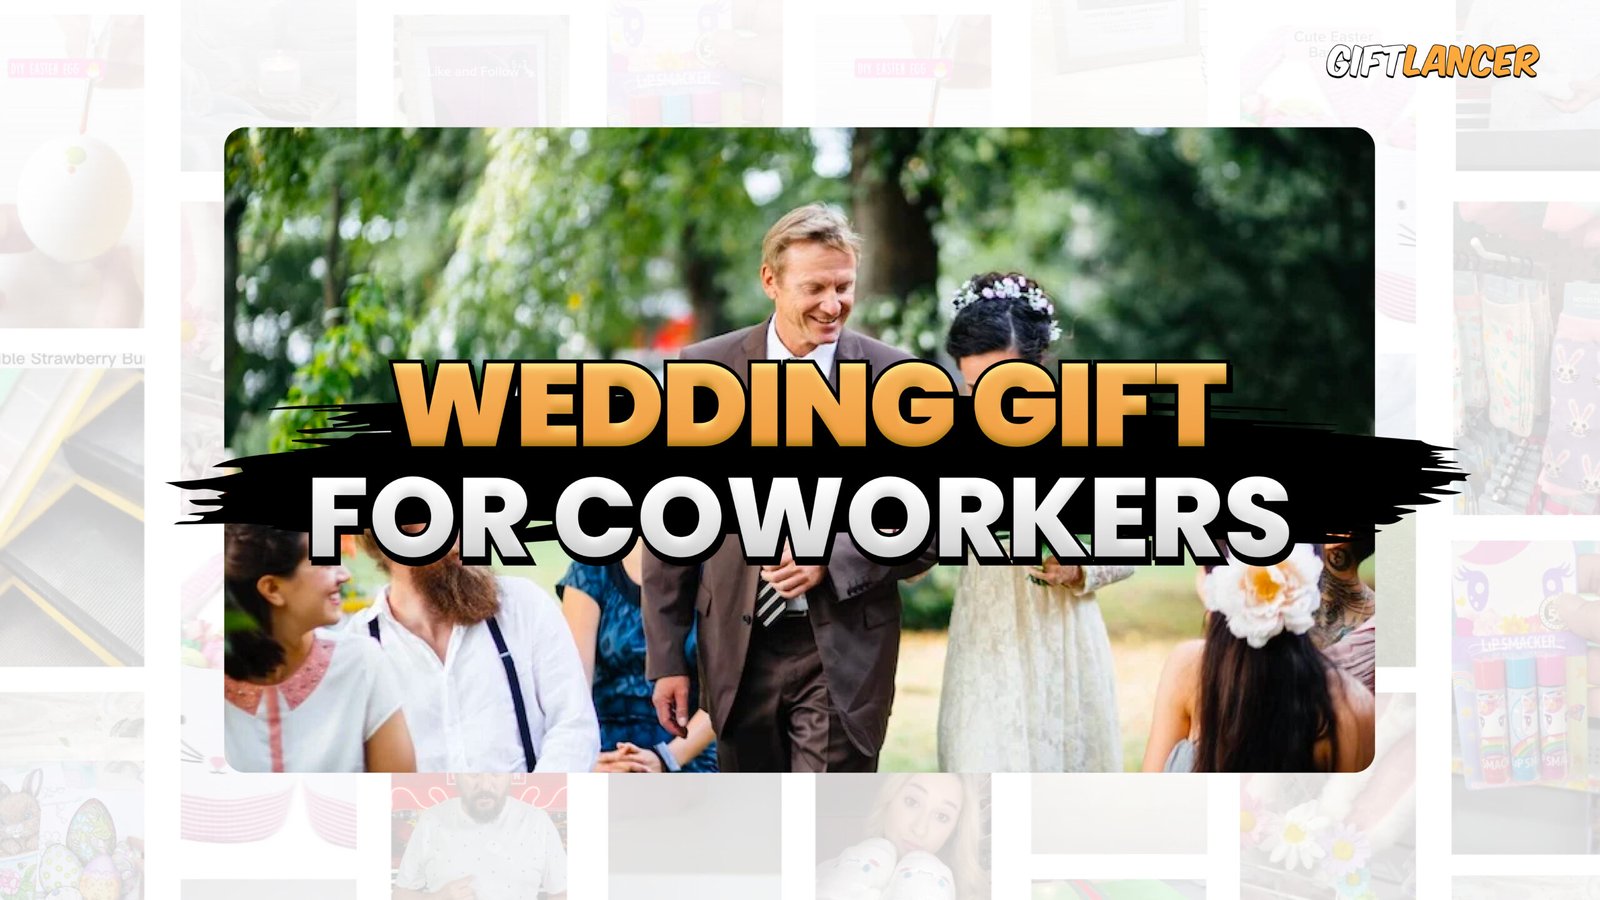 Unforgettable wedding Gifts idea for Coworkers – Canada’s Longest-Running Daytime Show Presents 13 Gifts